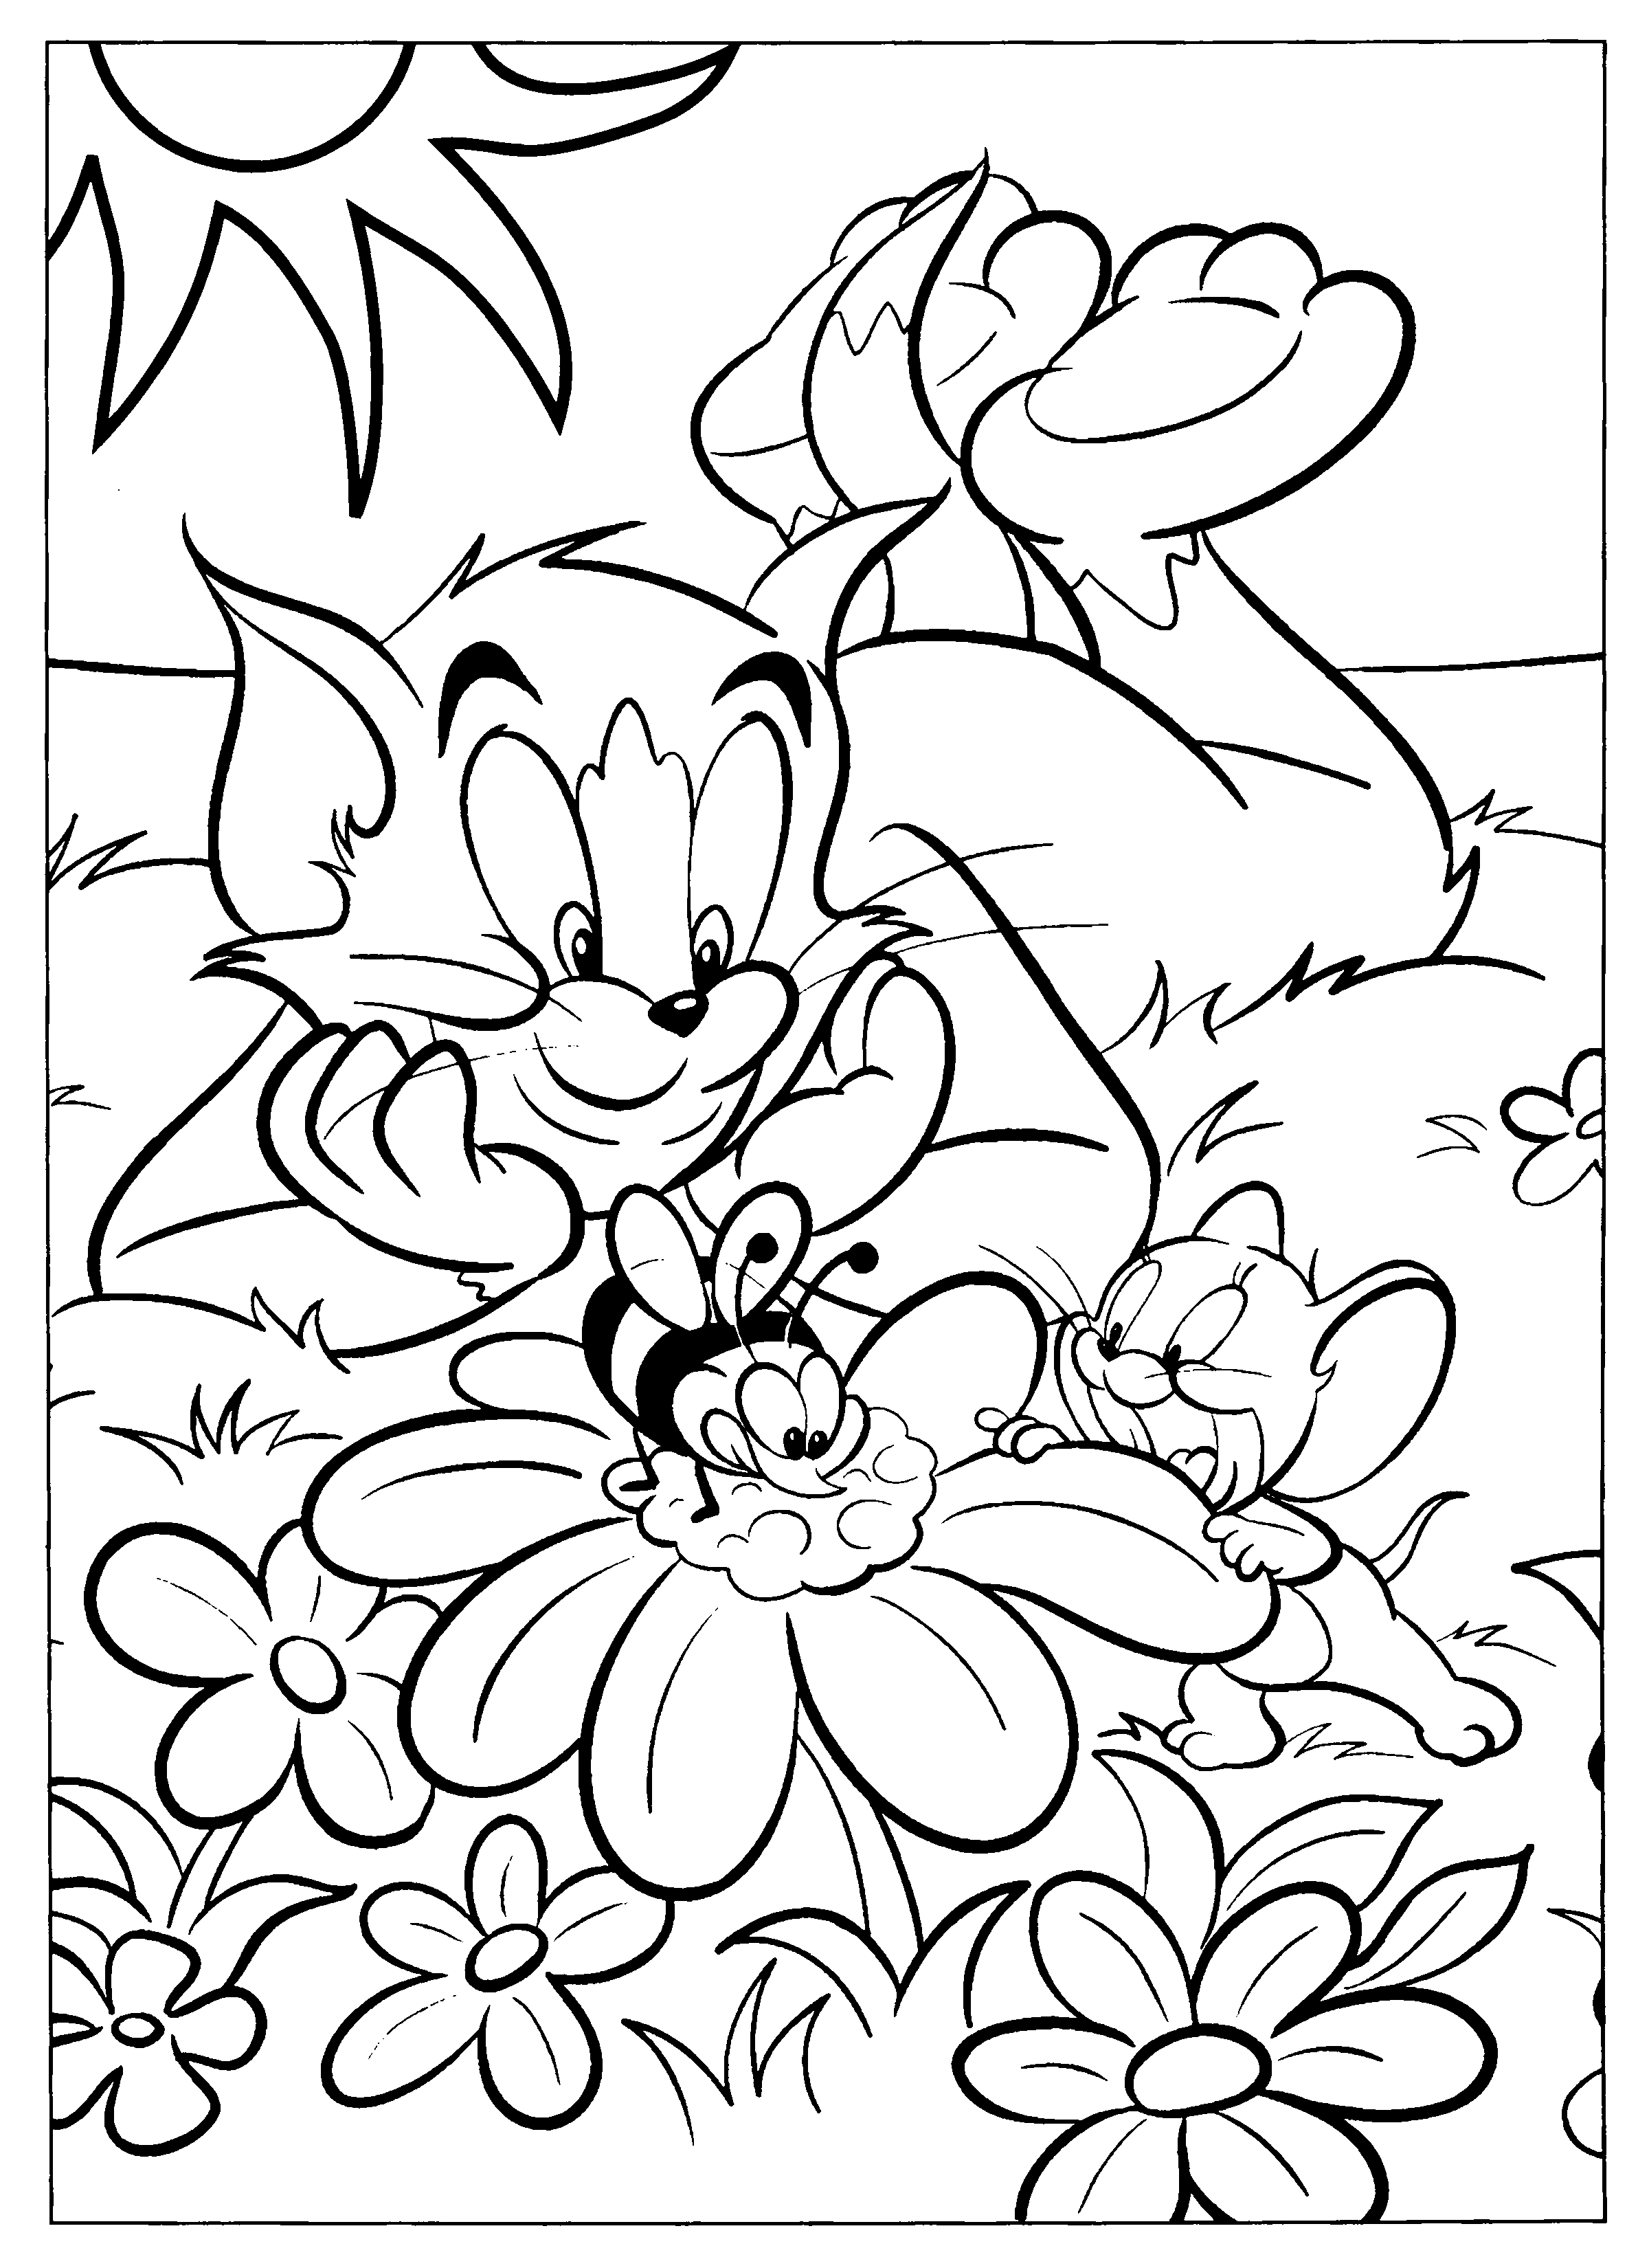 Tom and jerry Coloring Pages - SheetalColor.com